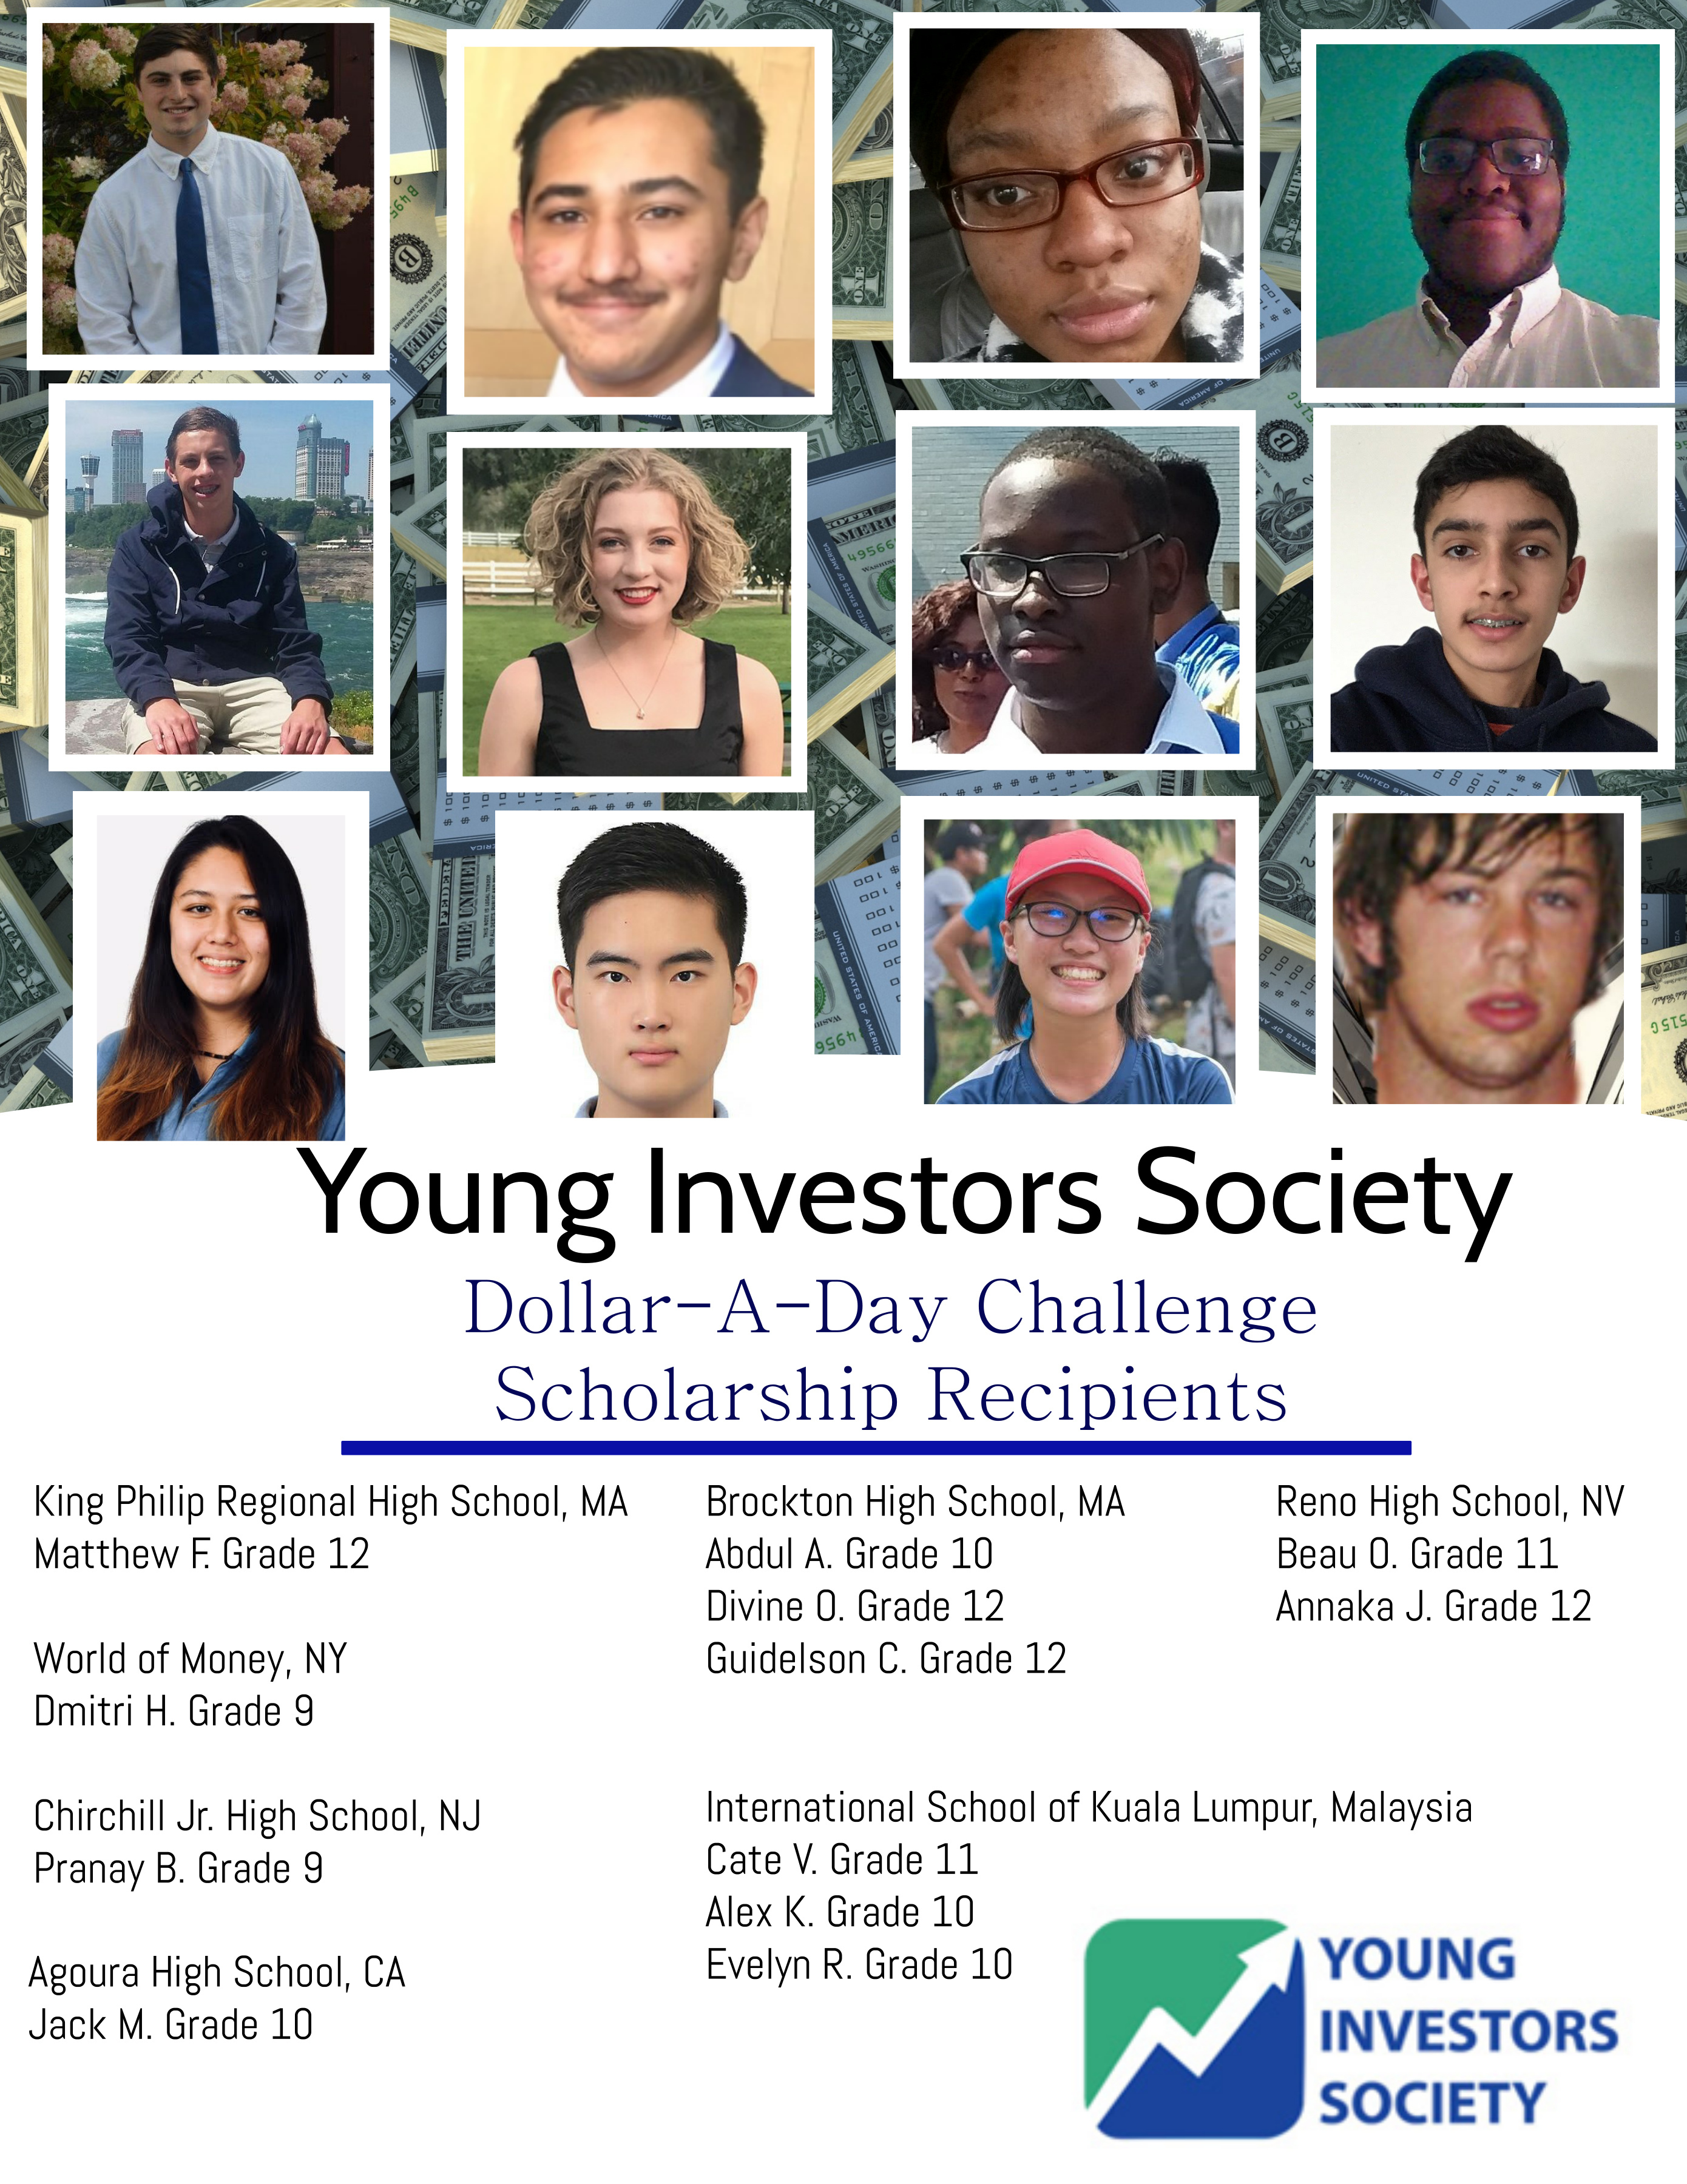 Congratulations to the YIS Dollar-A-Day Challenge Scholarship Recipients